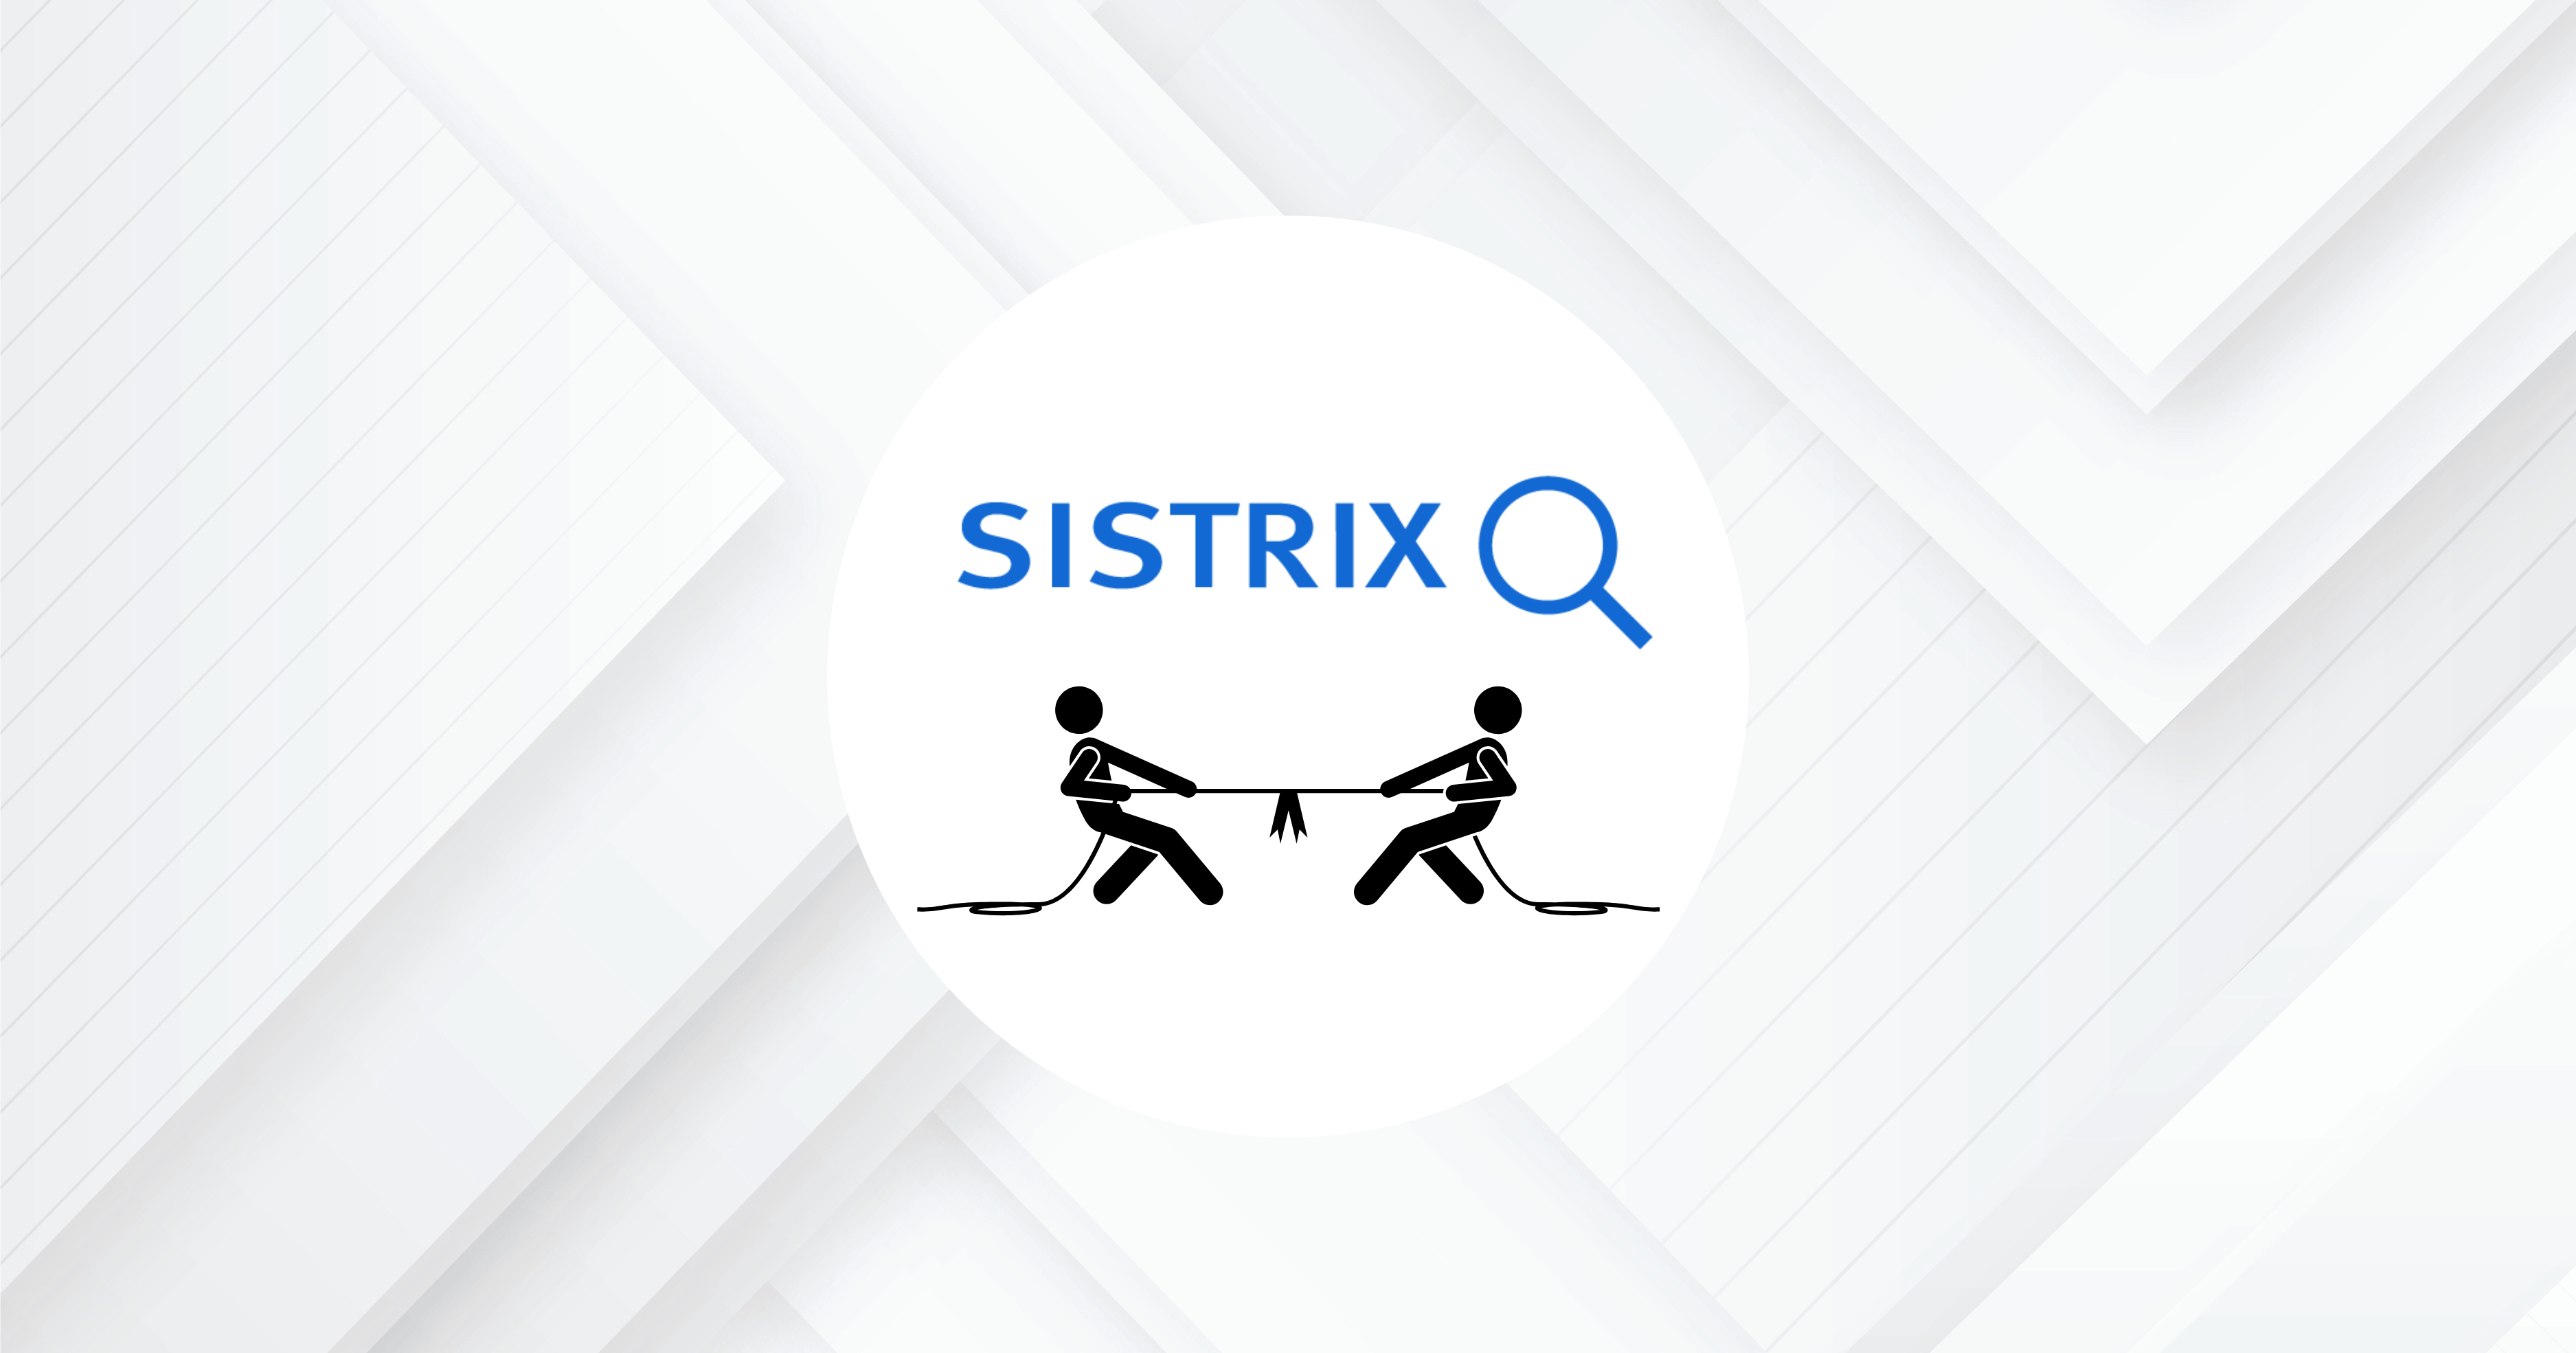 How to analyze SEO competition with Sistrix